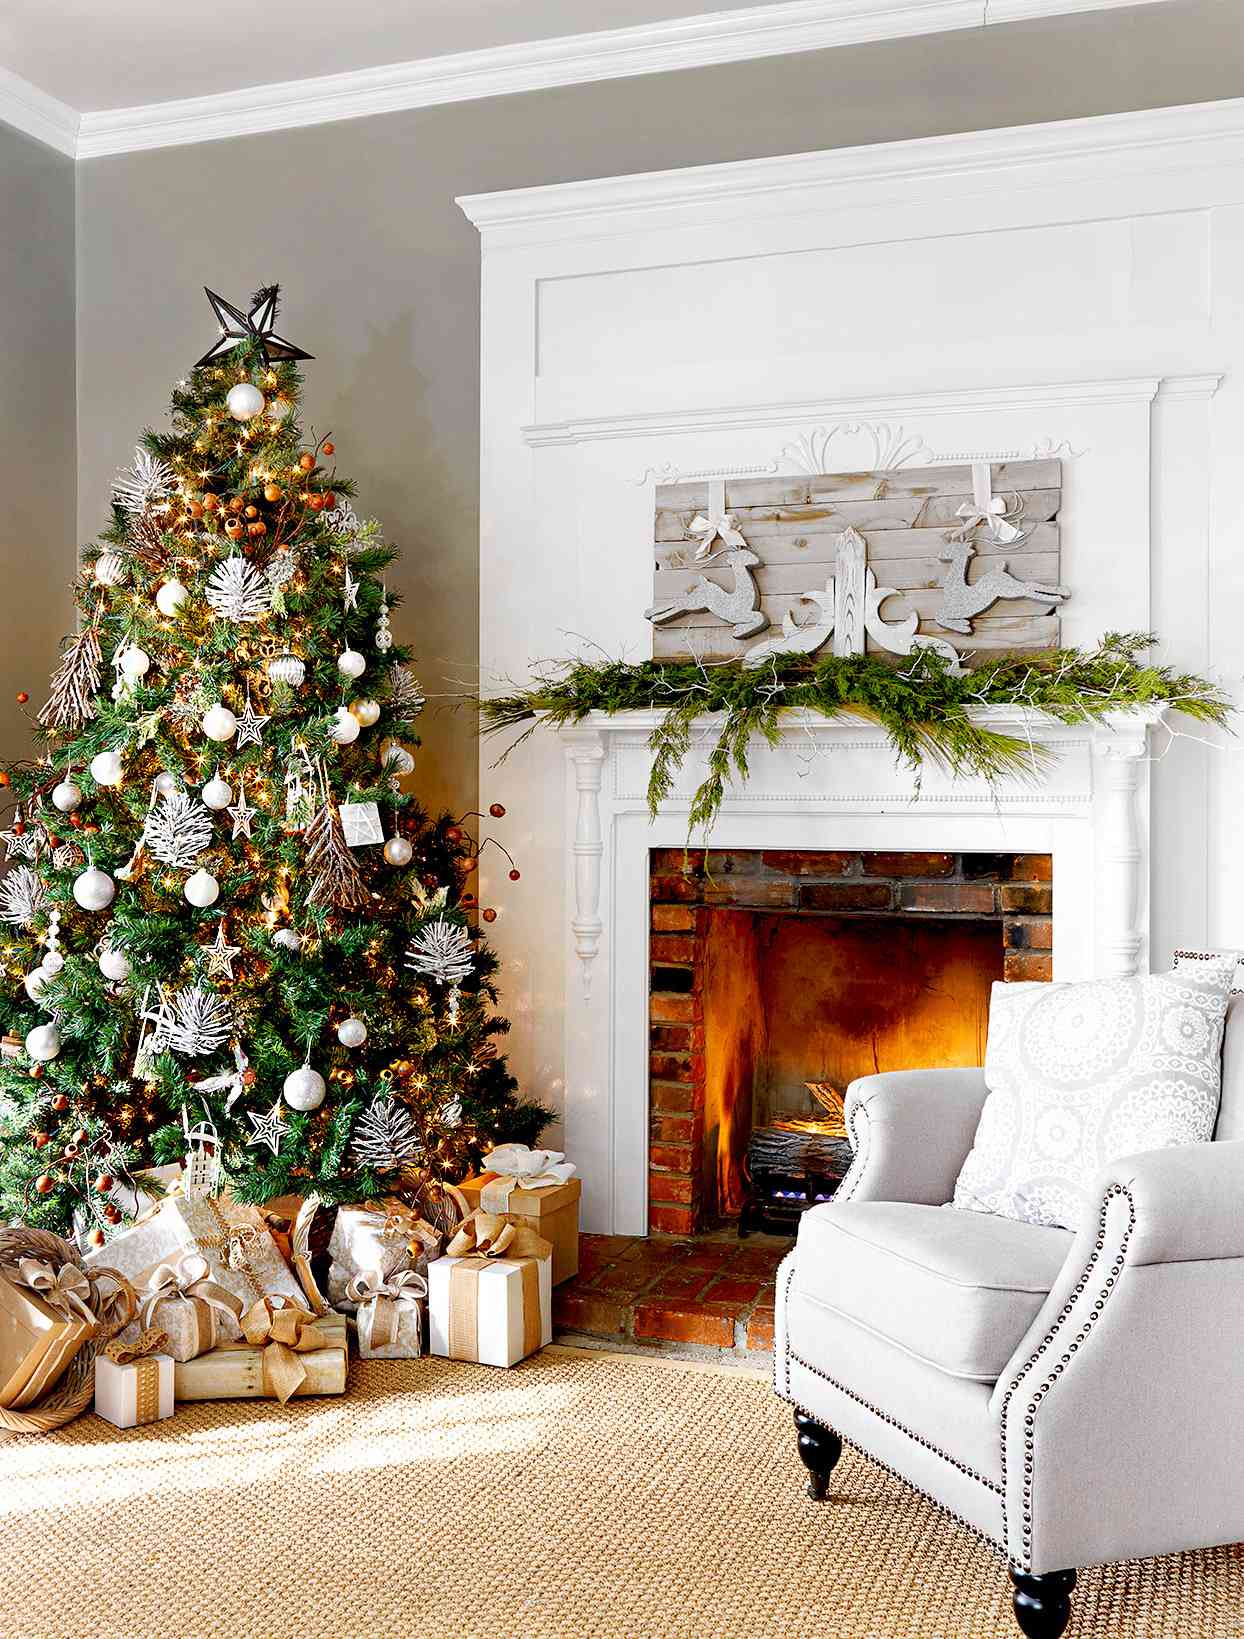 Living room with Christmas tree and white chair